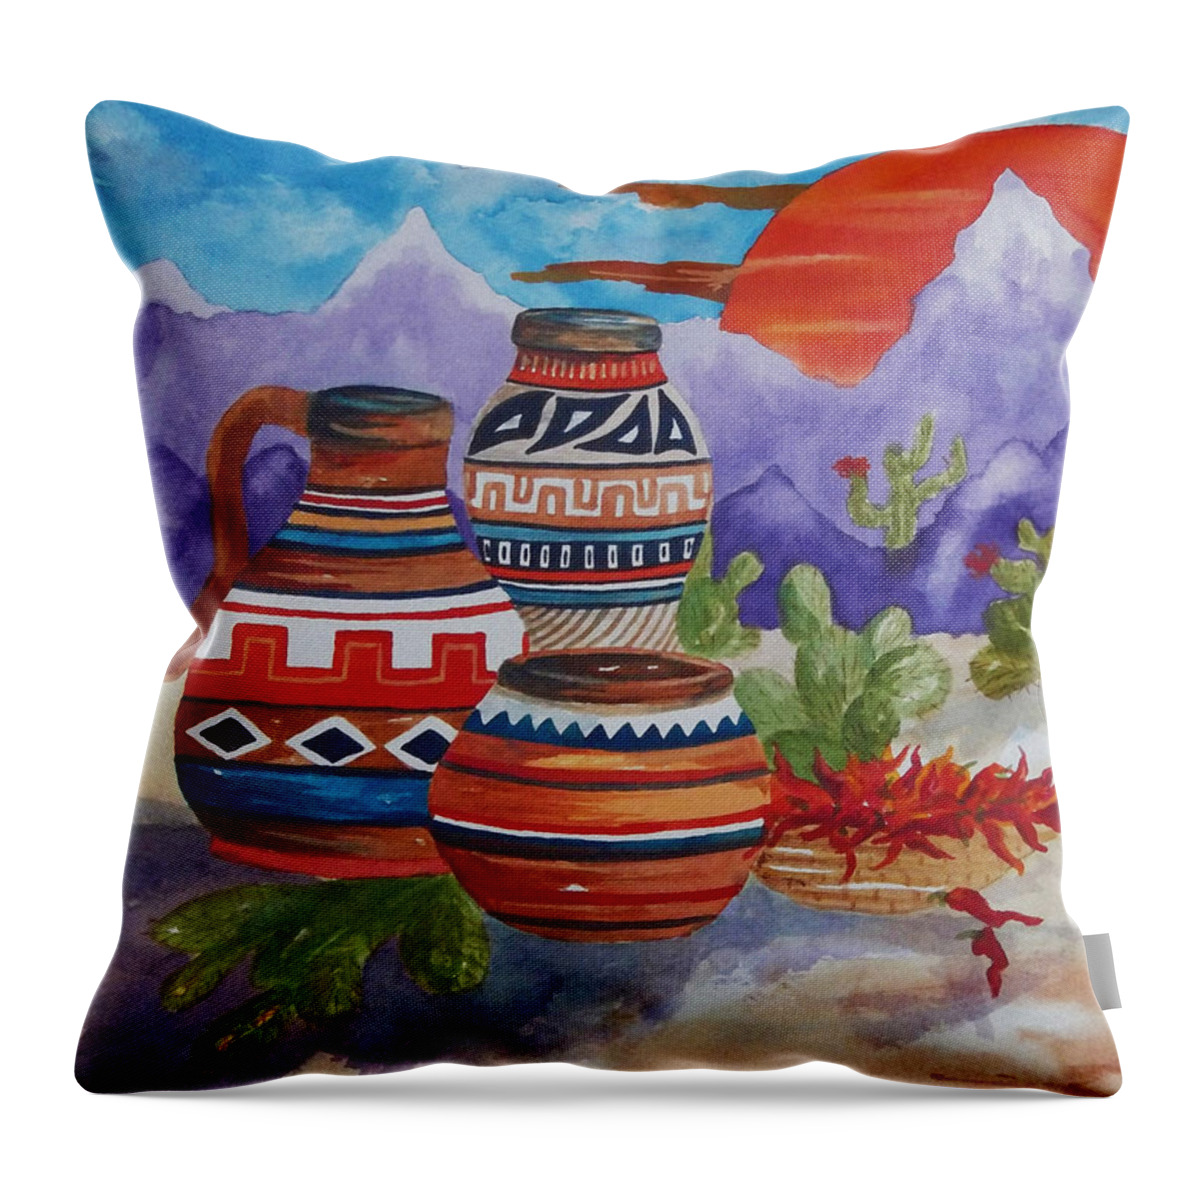 Desert Throw Pillow featuring the painting Painted Pots and Chili Peppers by Ellen Levinson